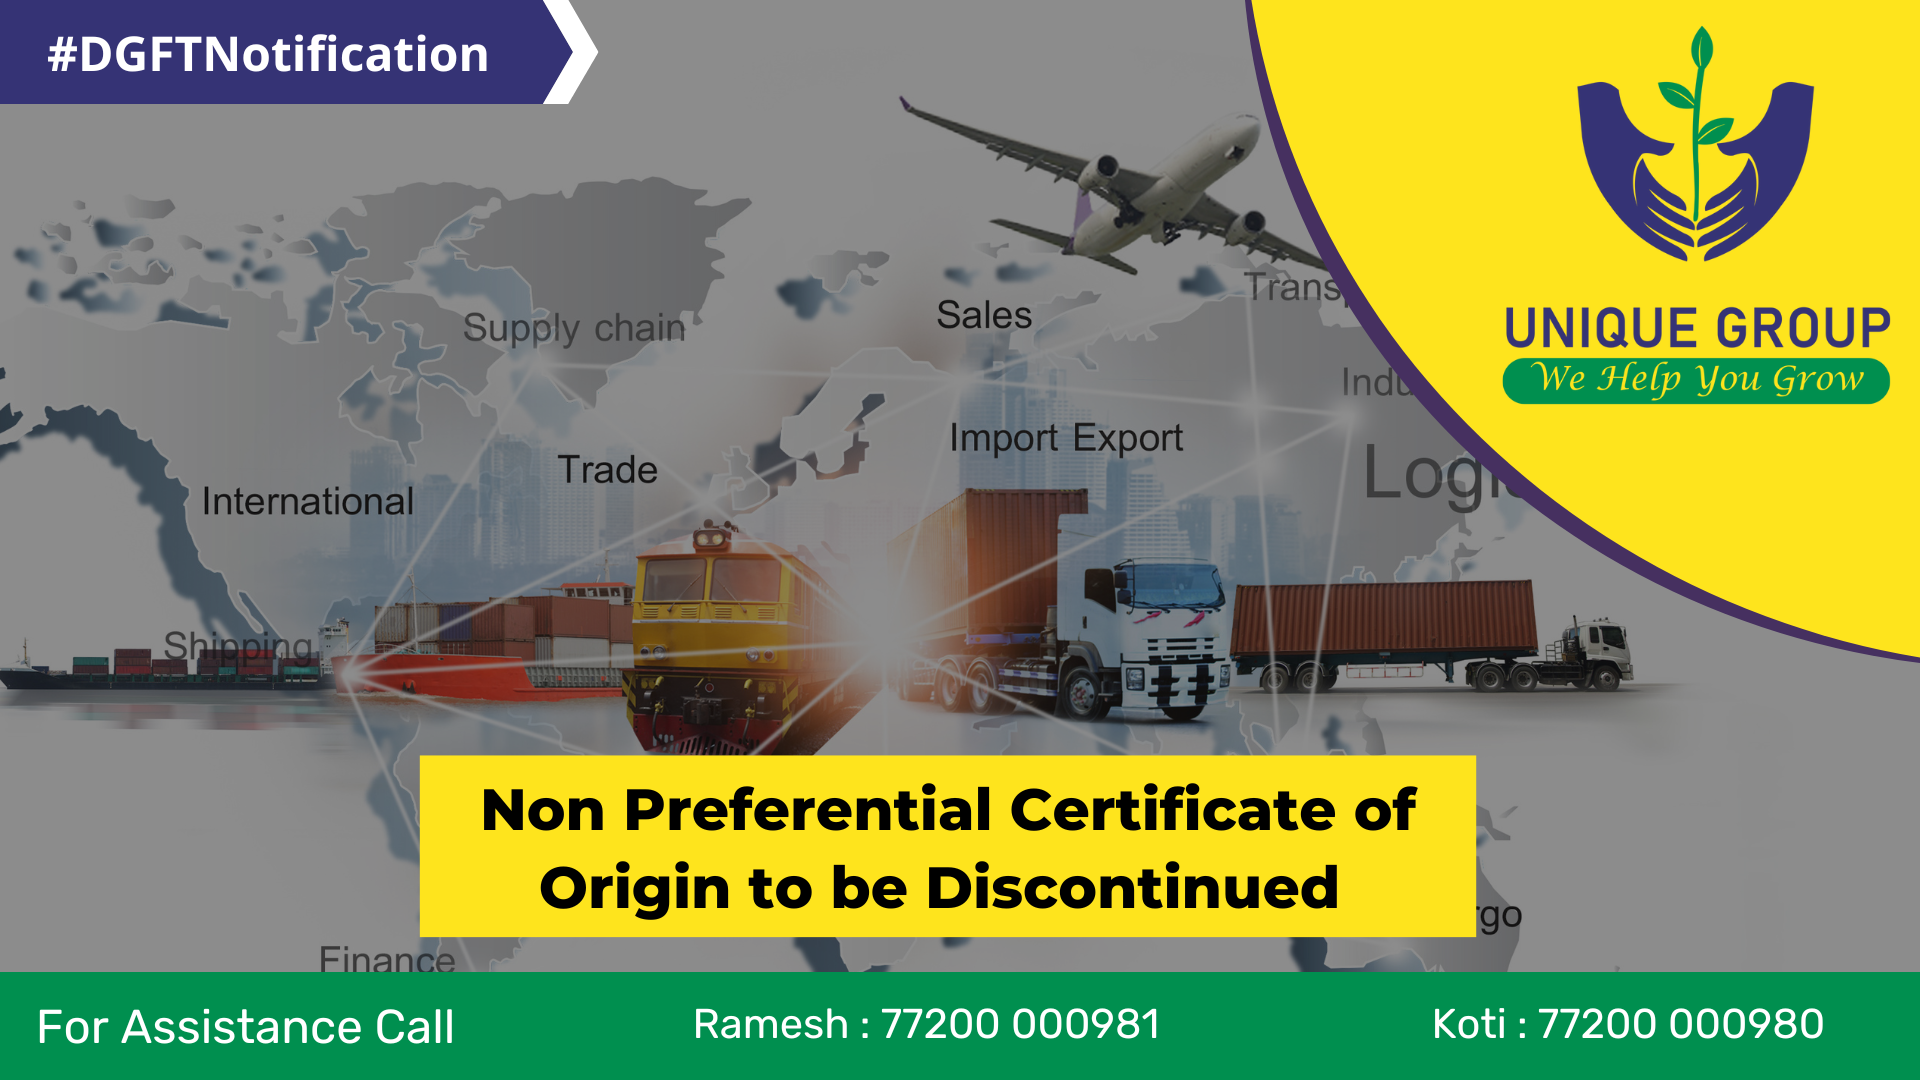 Non Preferential Certificate of Origin to be Discontinued